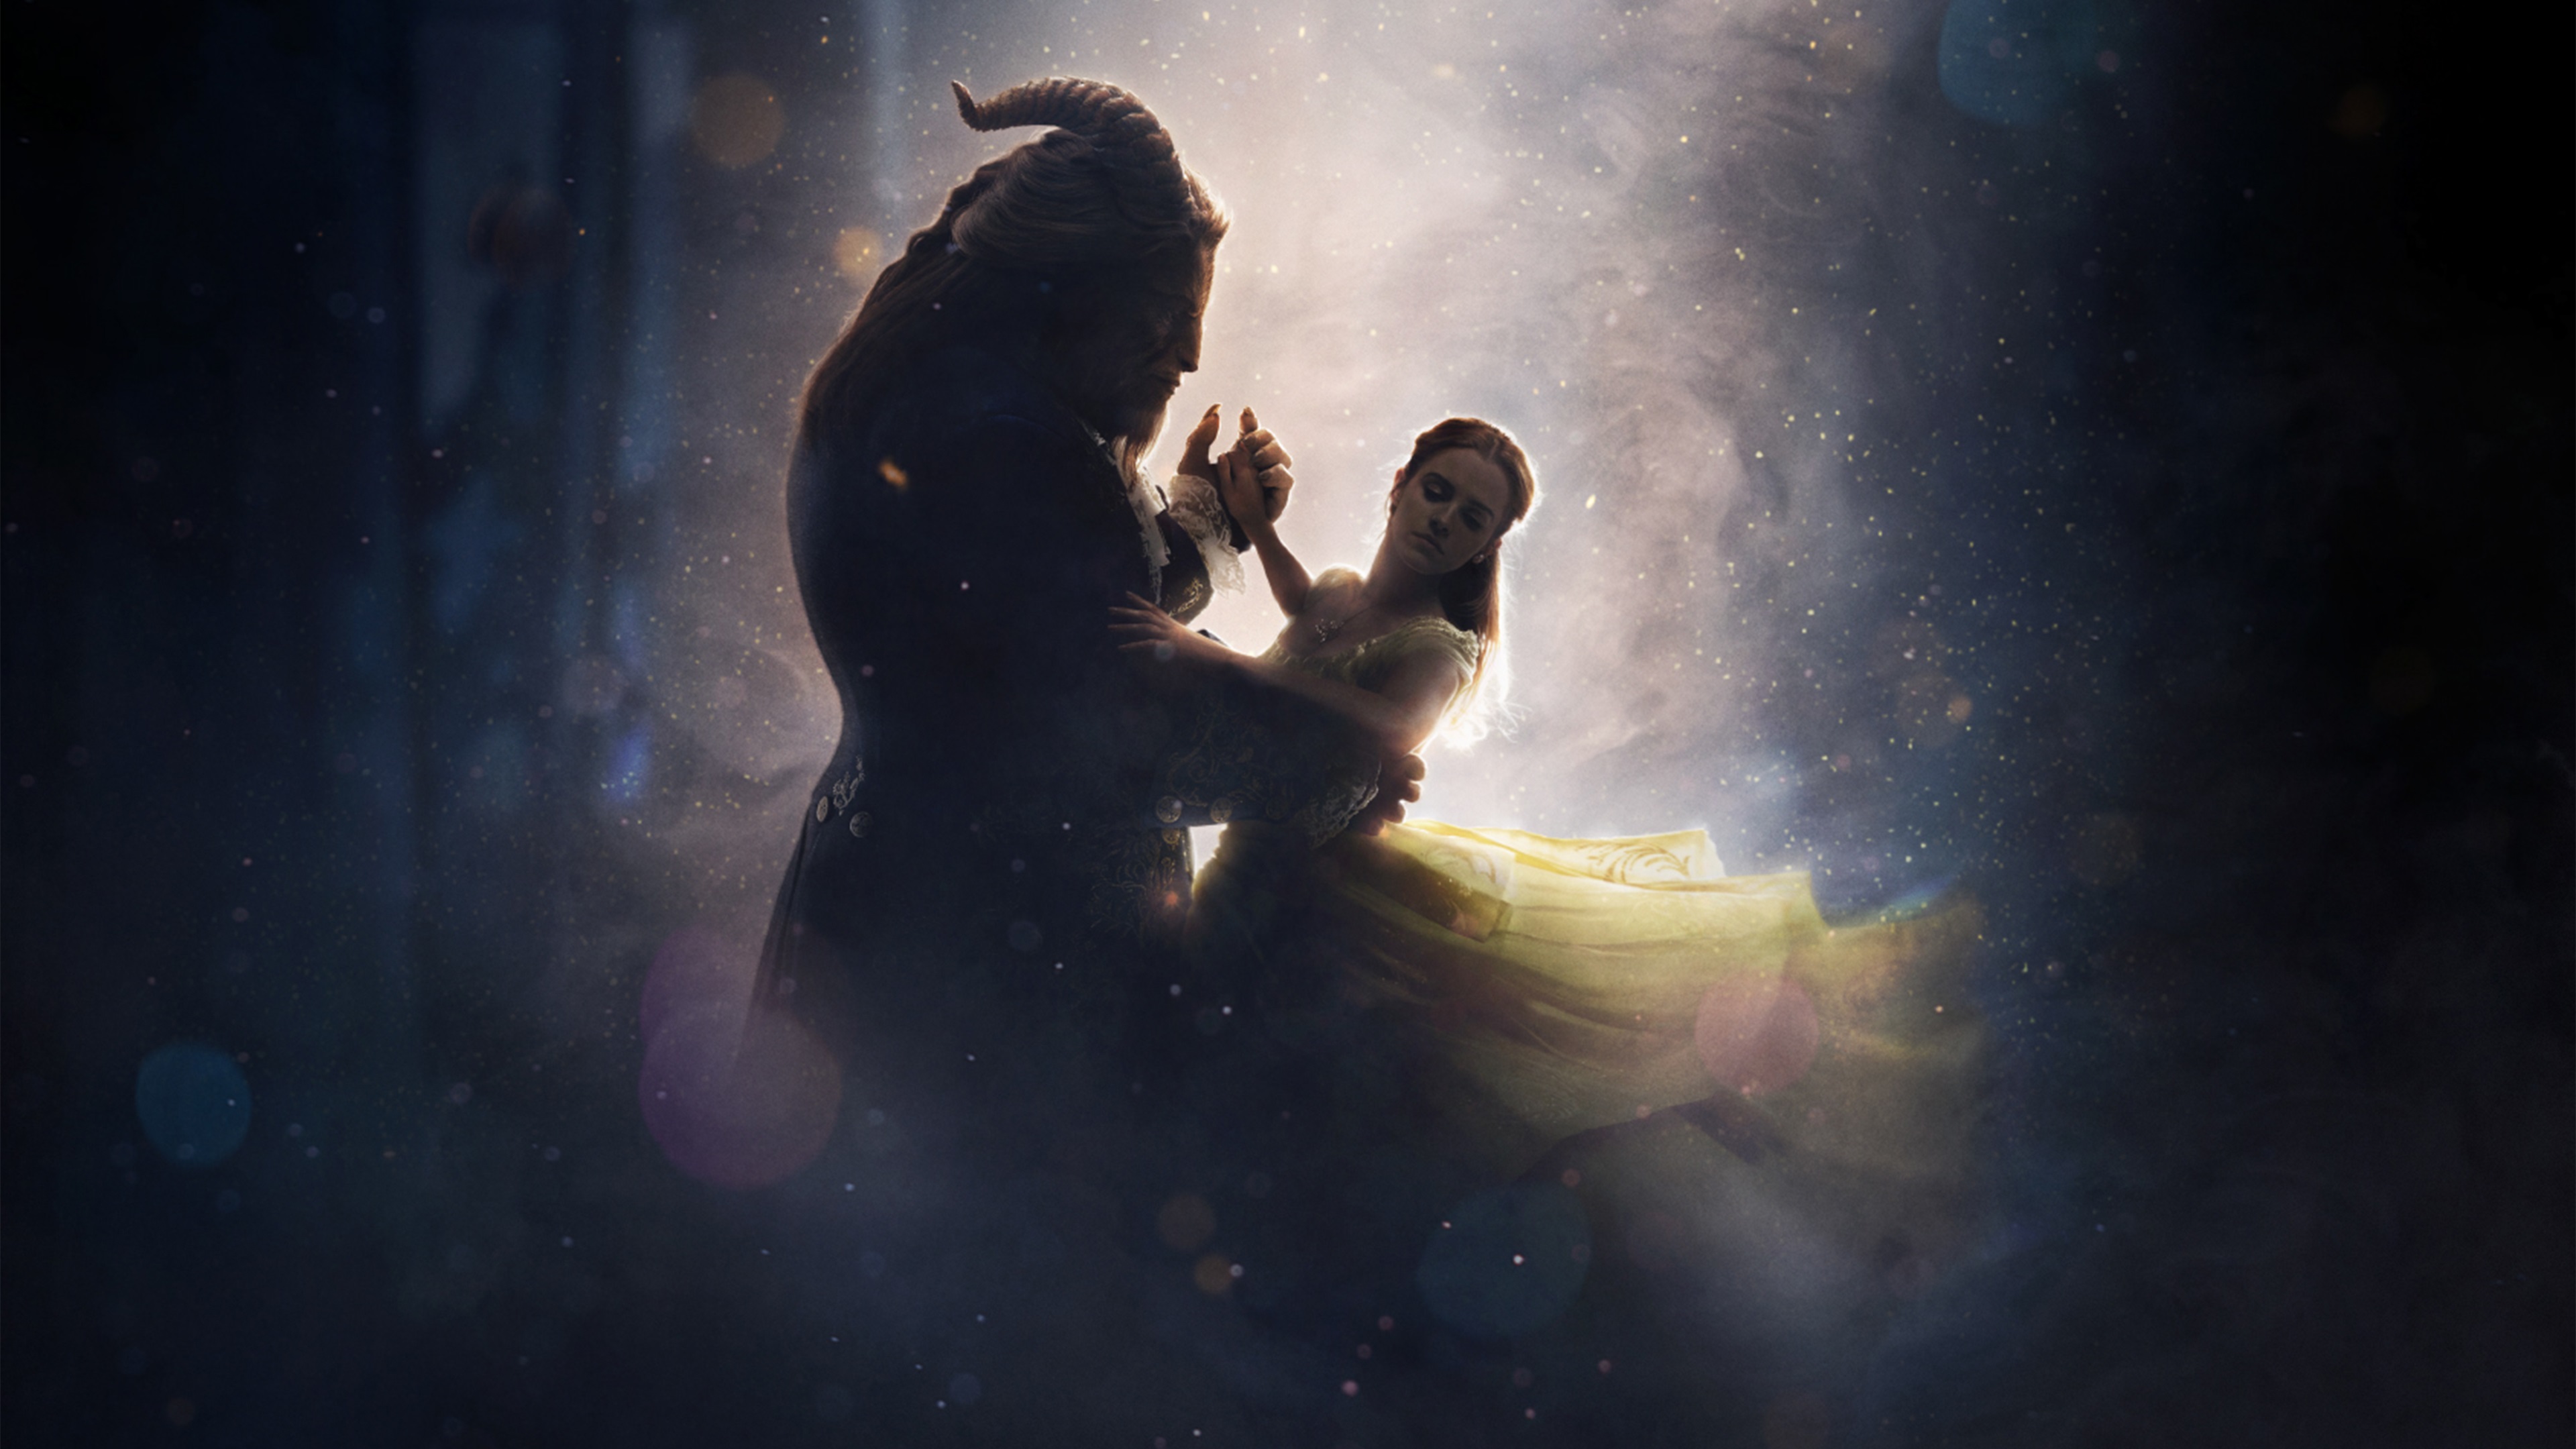 Beauty And The Beast - Beauty And Beast Hd - HD Wallpaper 